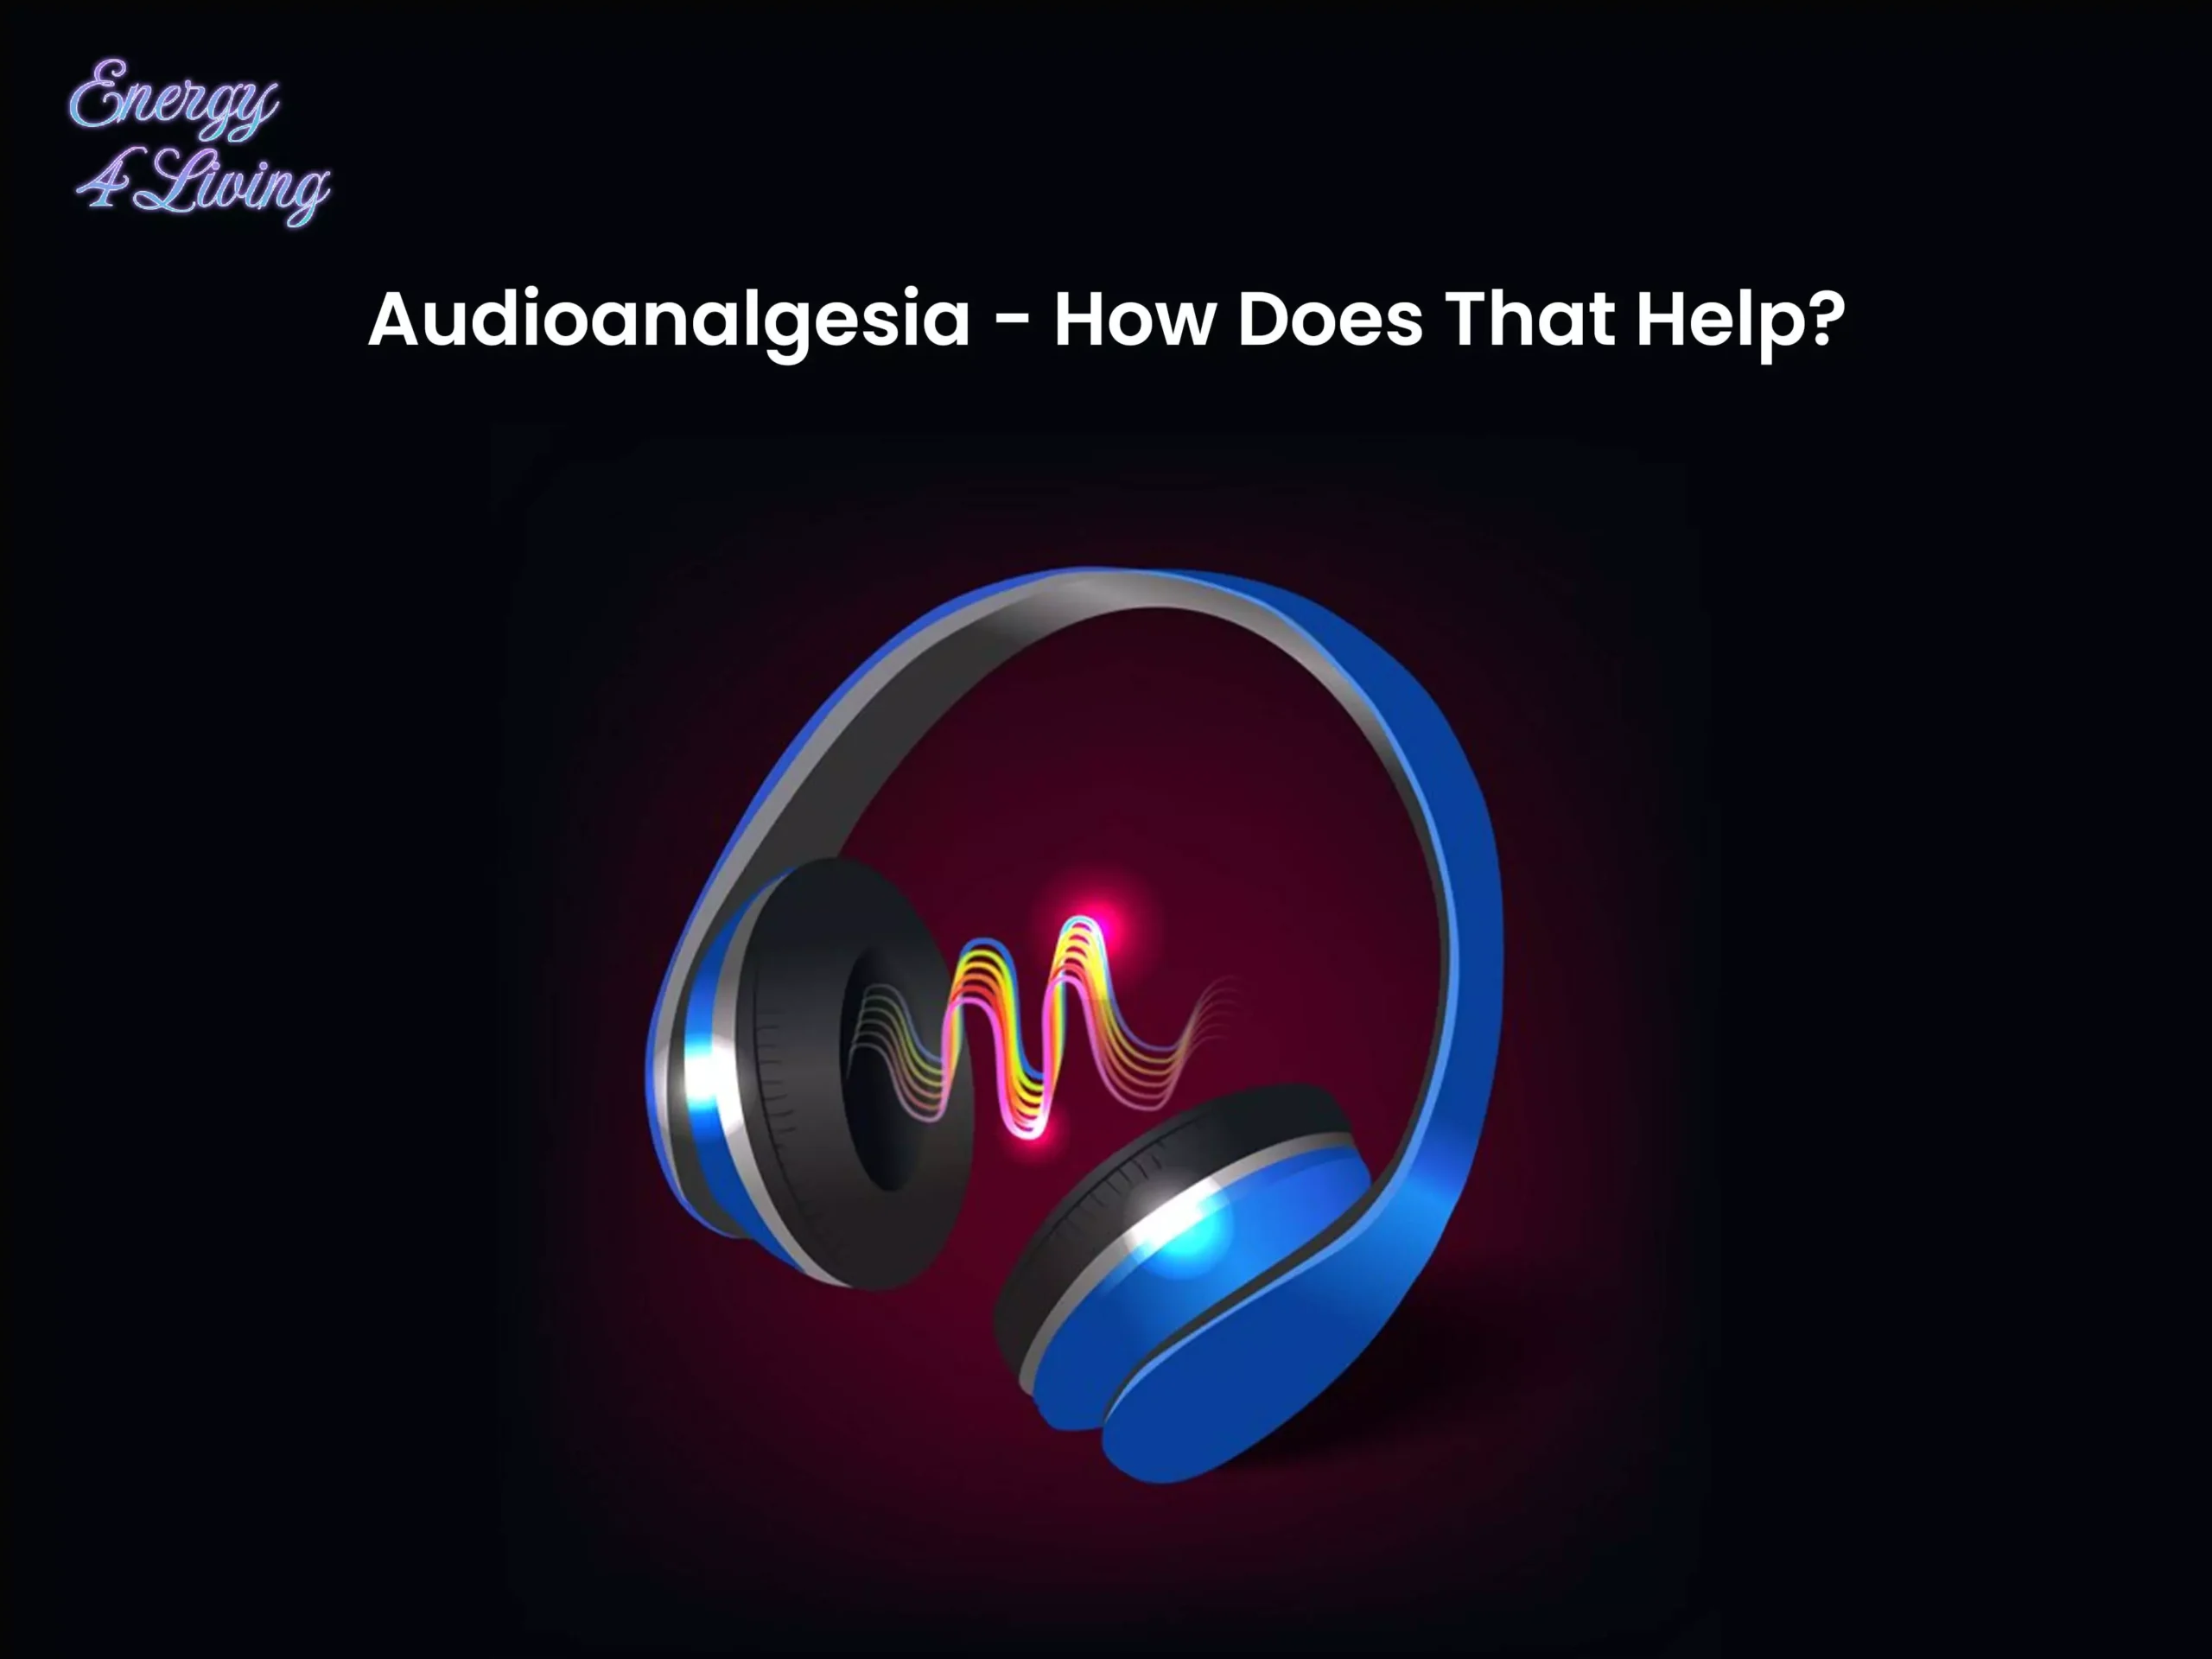 Audioanalgesia - How Does That Help?